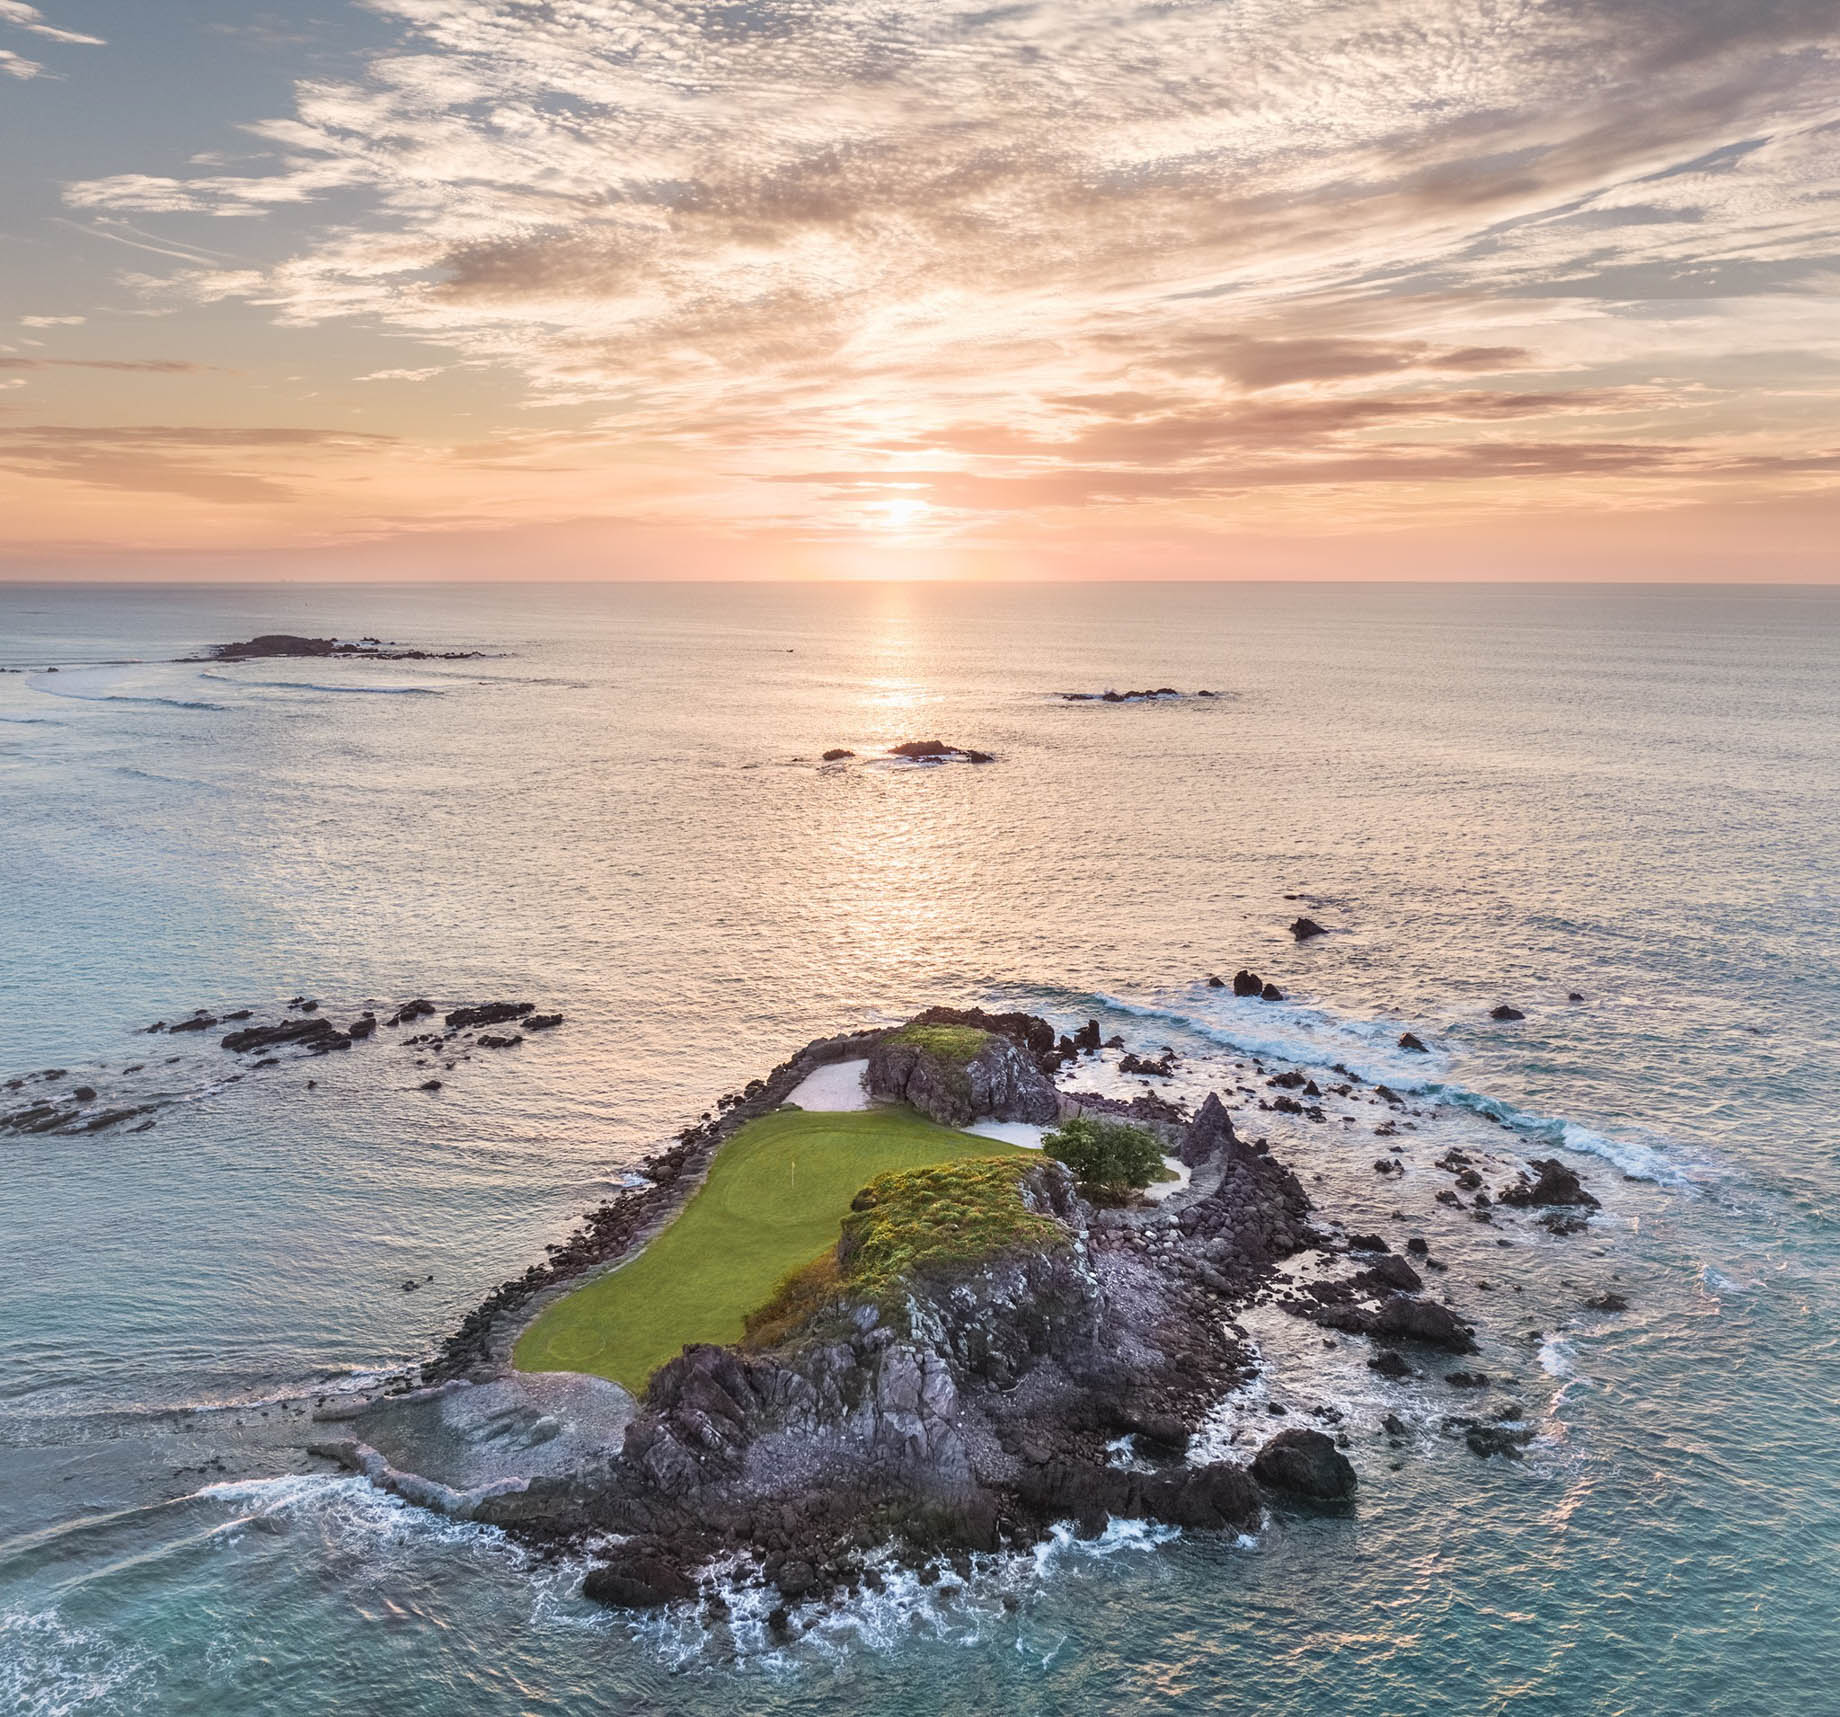 The St. Regis Punta Mita Resort – Nayarit, Mexico – Resort Golf Course Aerial View Tail of the Whale Hole